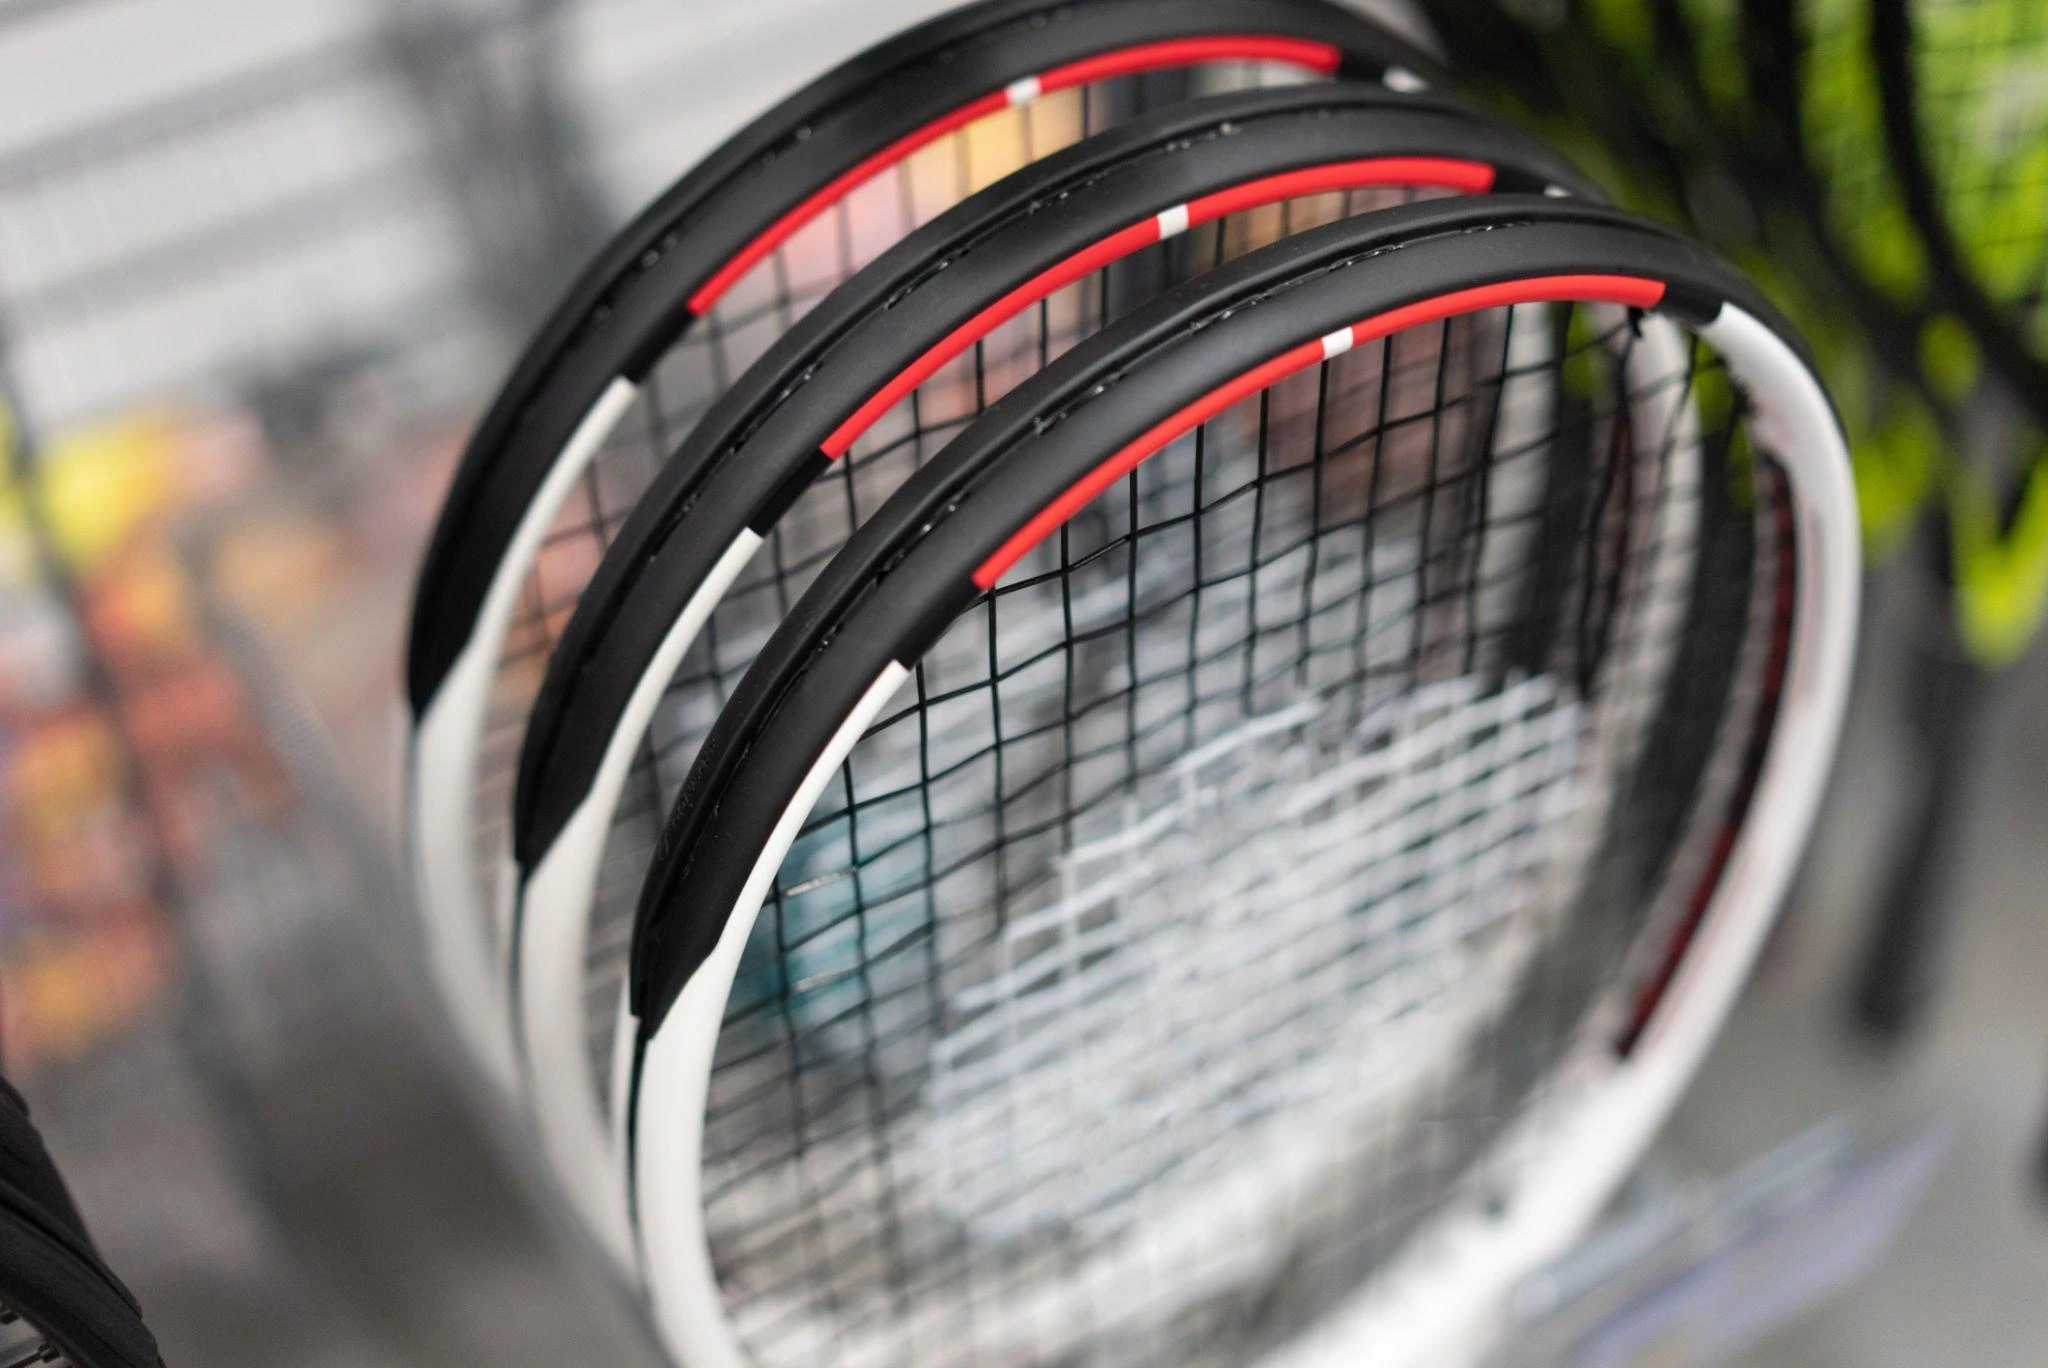  Get everything you need for a great game of badminton at one of Dubai's best courts, including high-quality rackets, shuttlecocks, and more.